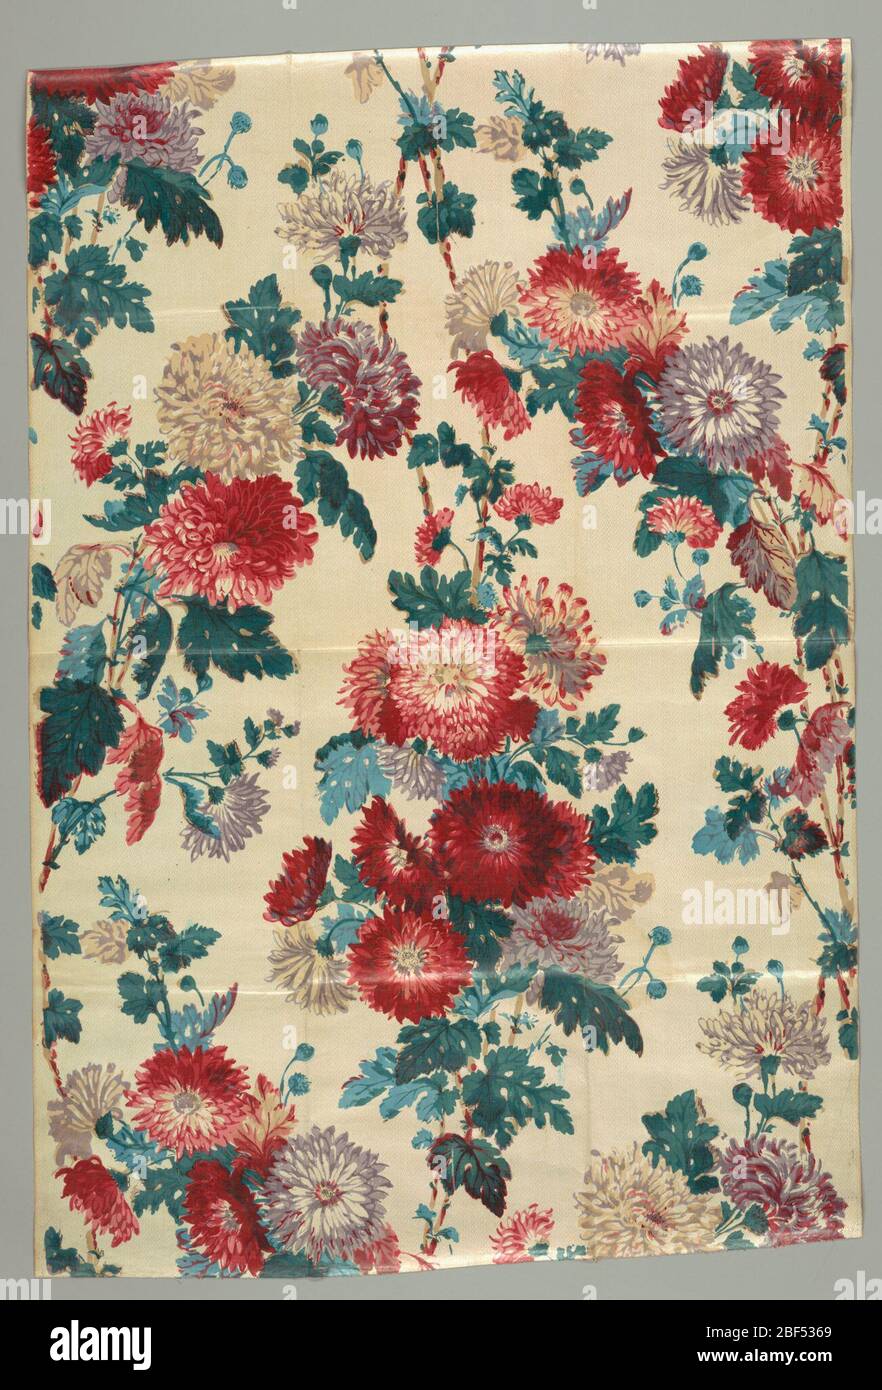 Textile. Allover design of asters in red, purple, blue and green on an off-white ground. Stock Photo